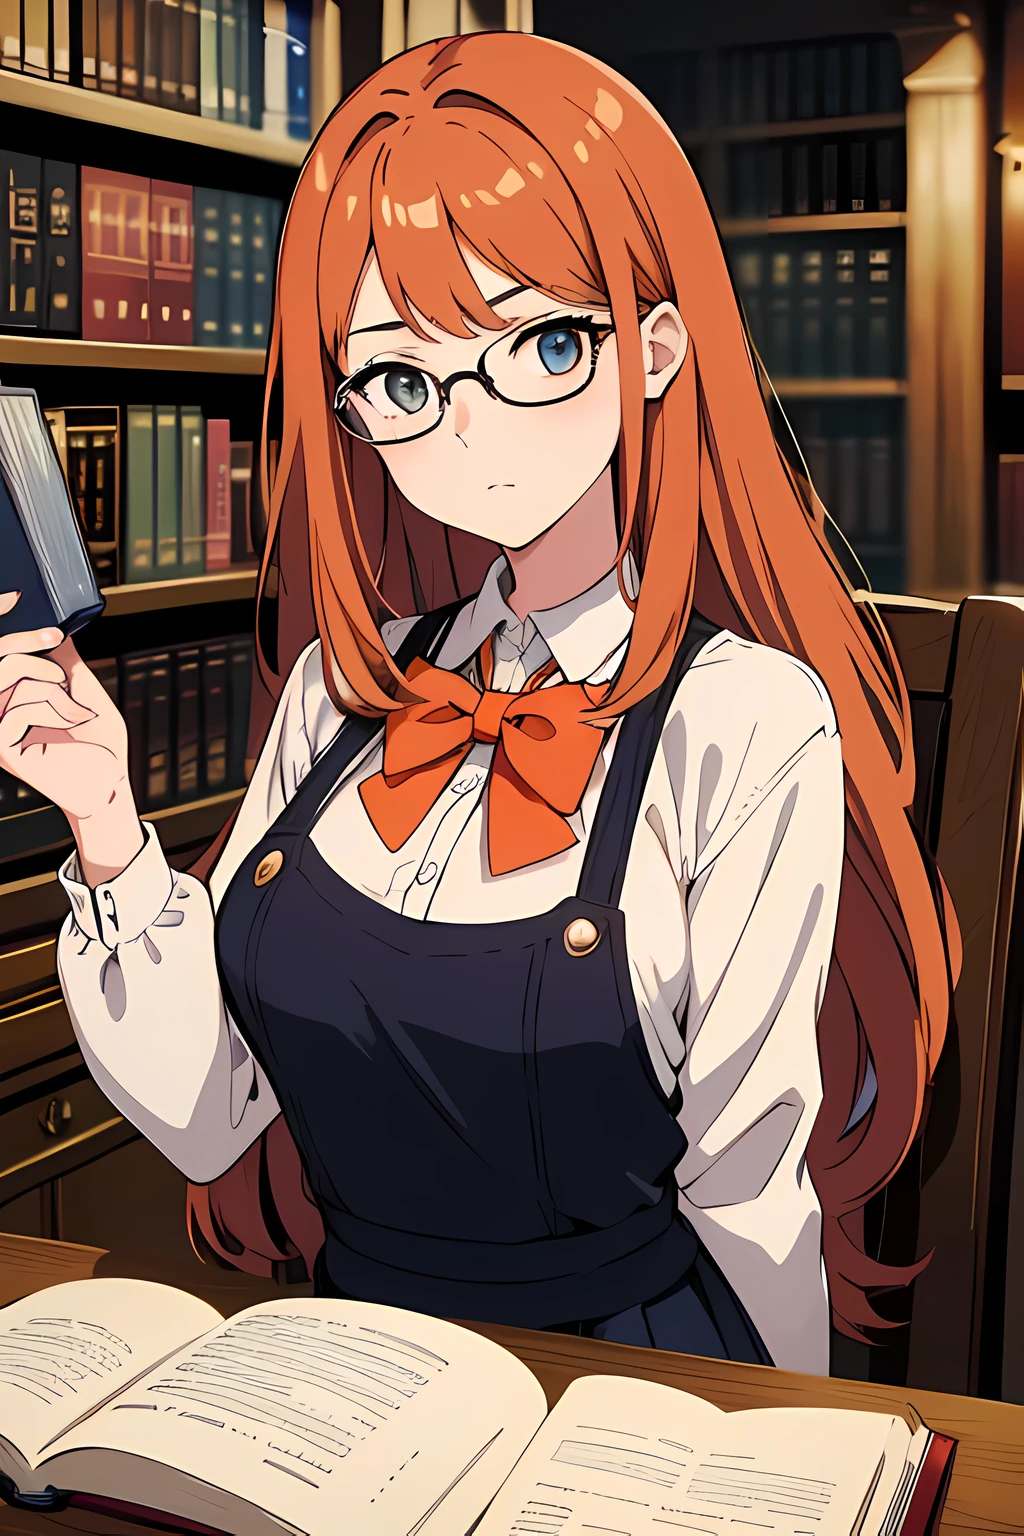 (1 girl, wearing round glasses), (beautiful eyes finely detailed, face to detail, dark orange hair, long hair), wearing librarian outfit, chill facial expression, standing near bookshelf, touching a book in the bookshelf, at the library, many magical particle surrounding her, masterpiece, top-quality, detailed, high resolution illustration